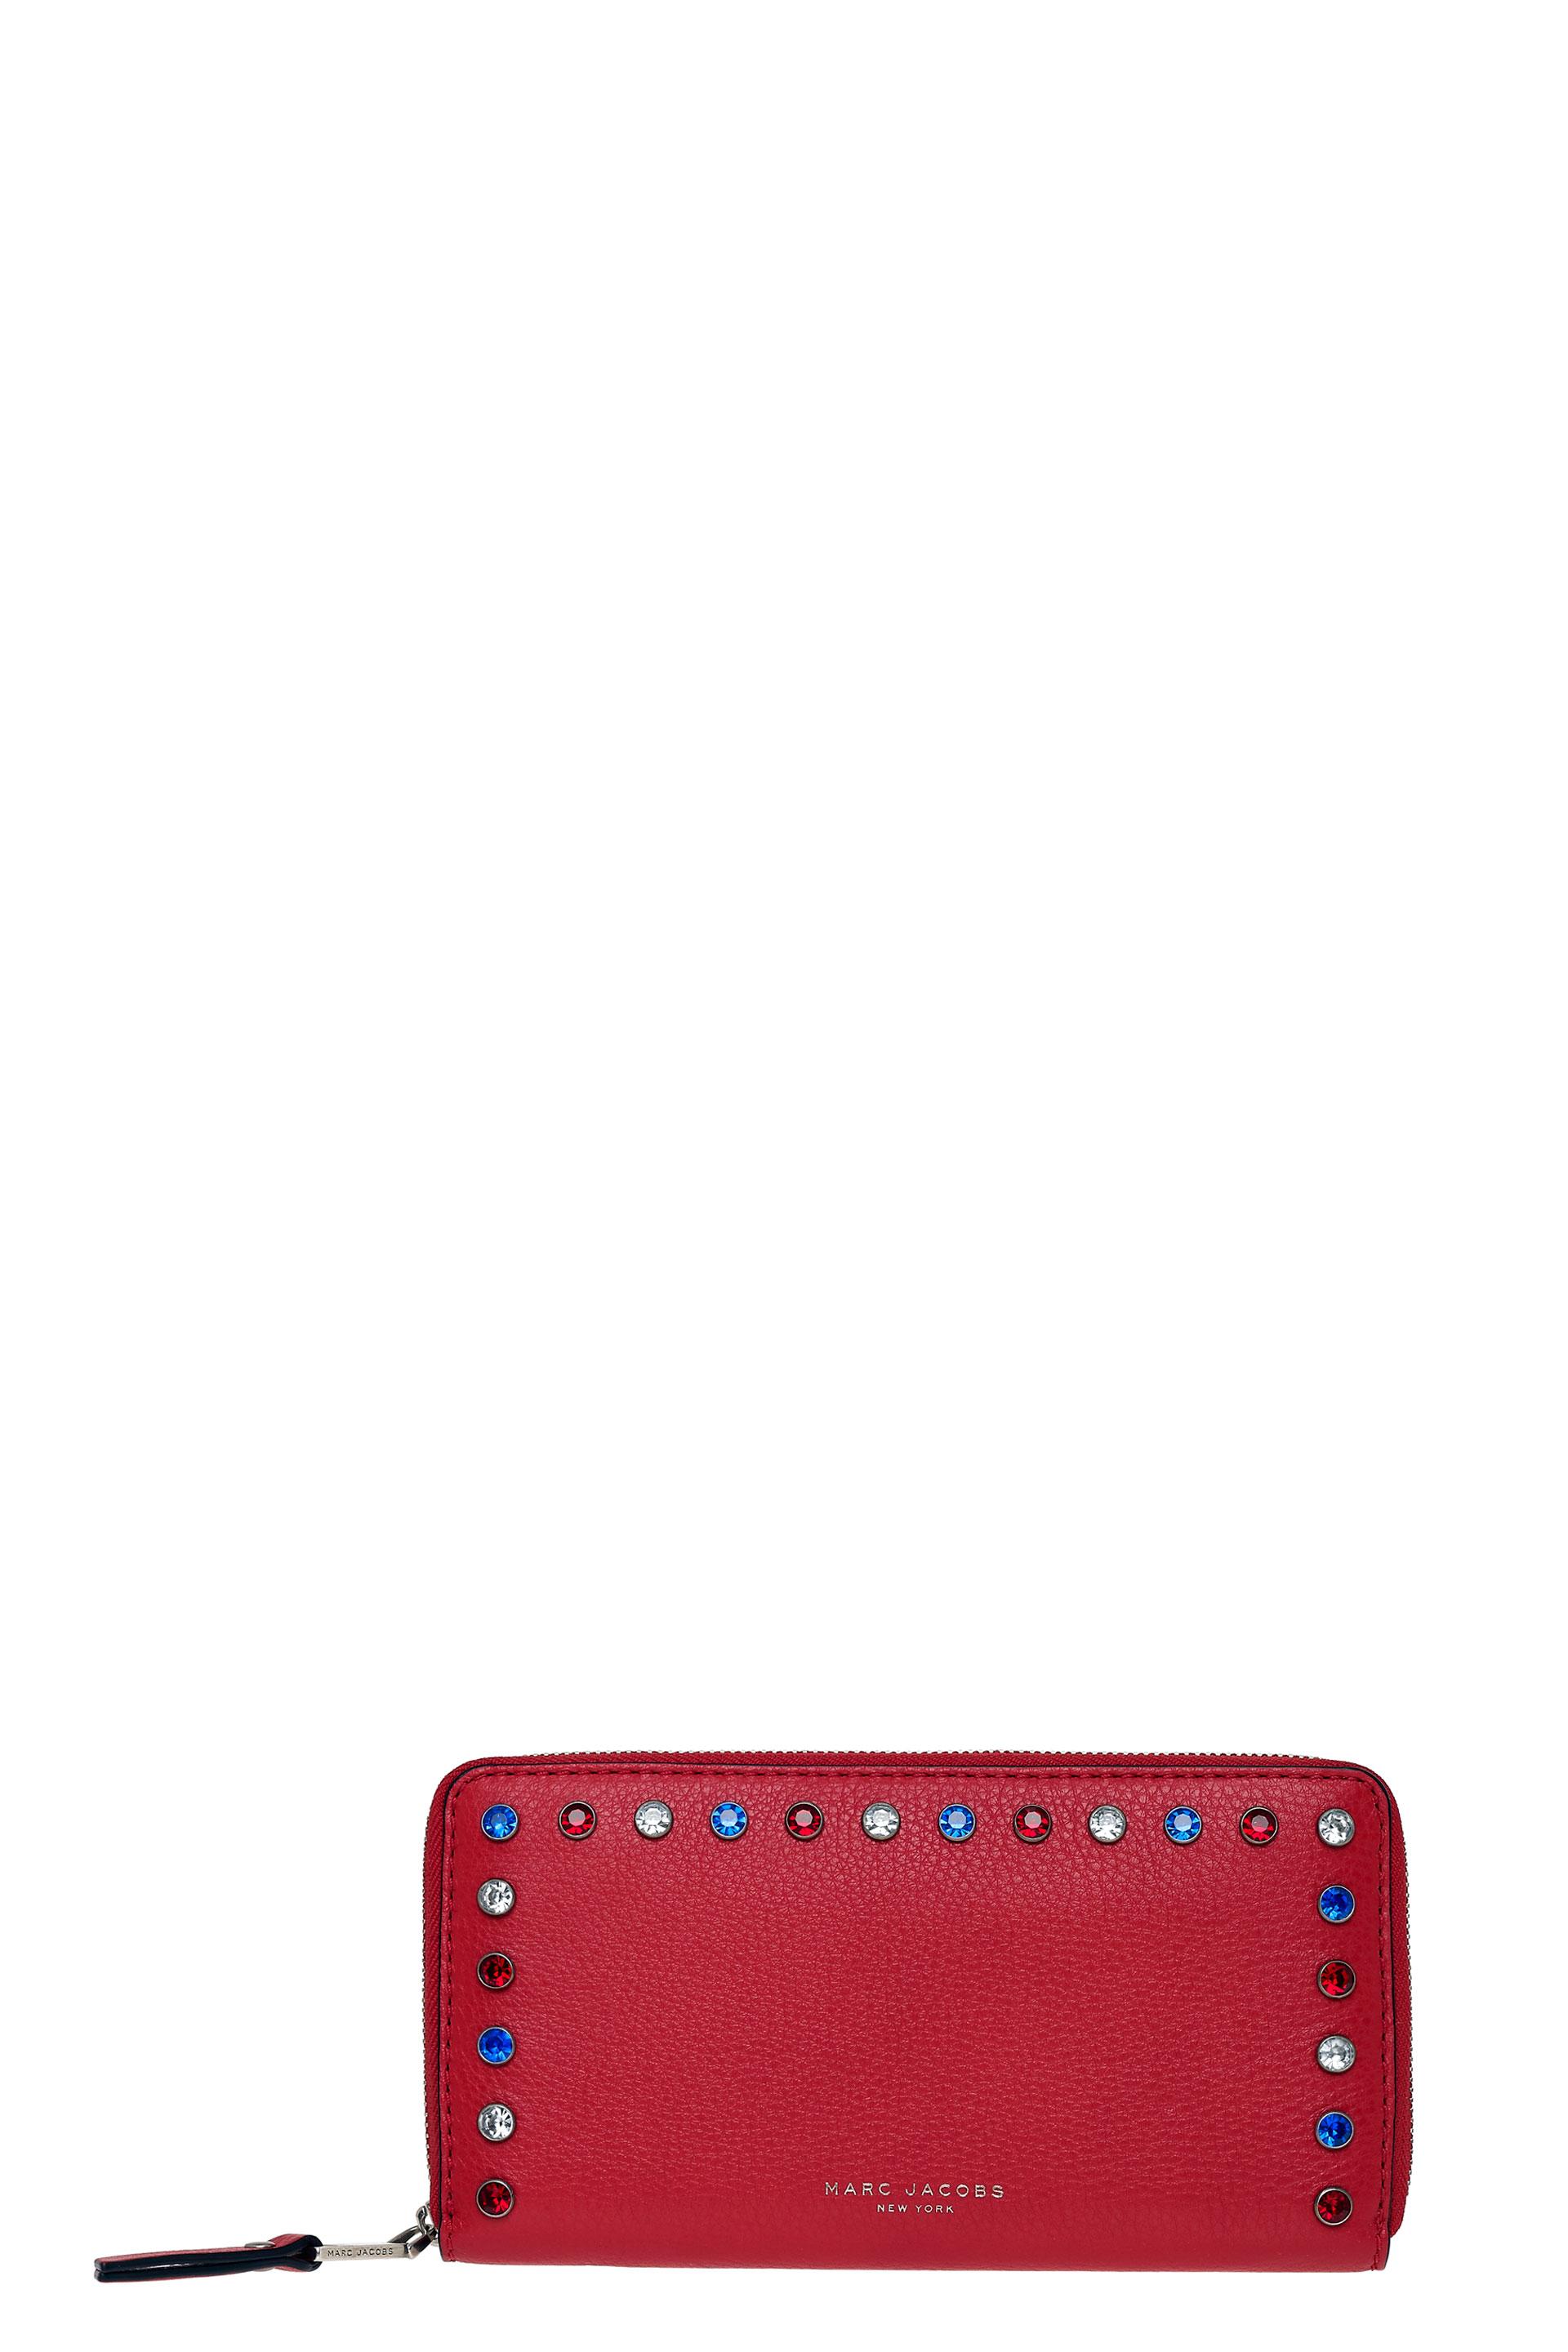 Marc Jacobs P.y.t. Standard Leather Strap Wallet In Brilliant Red ...